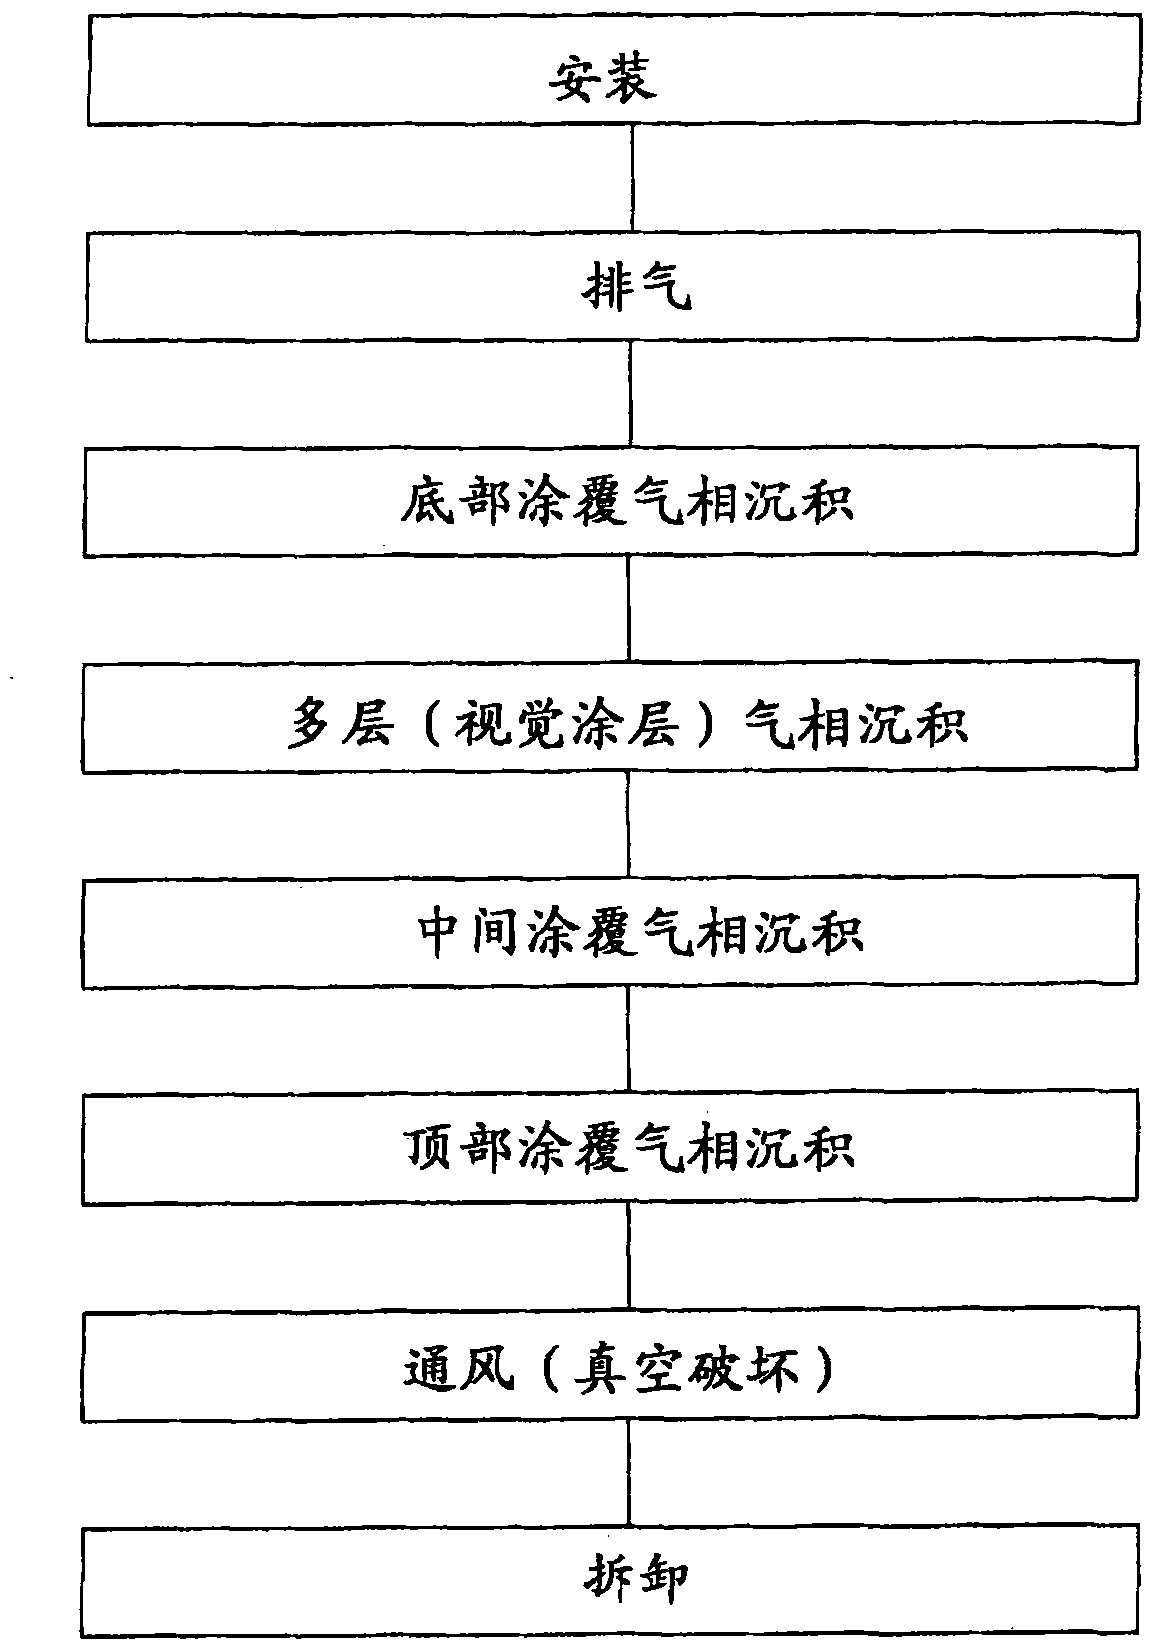 Process for manufacturing multi-layered thin film by dry vacuum vapor deposition